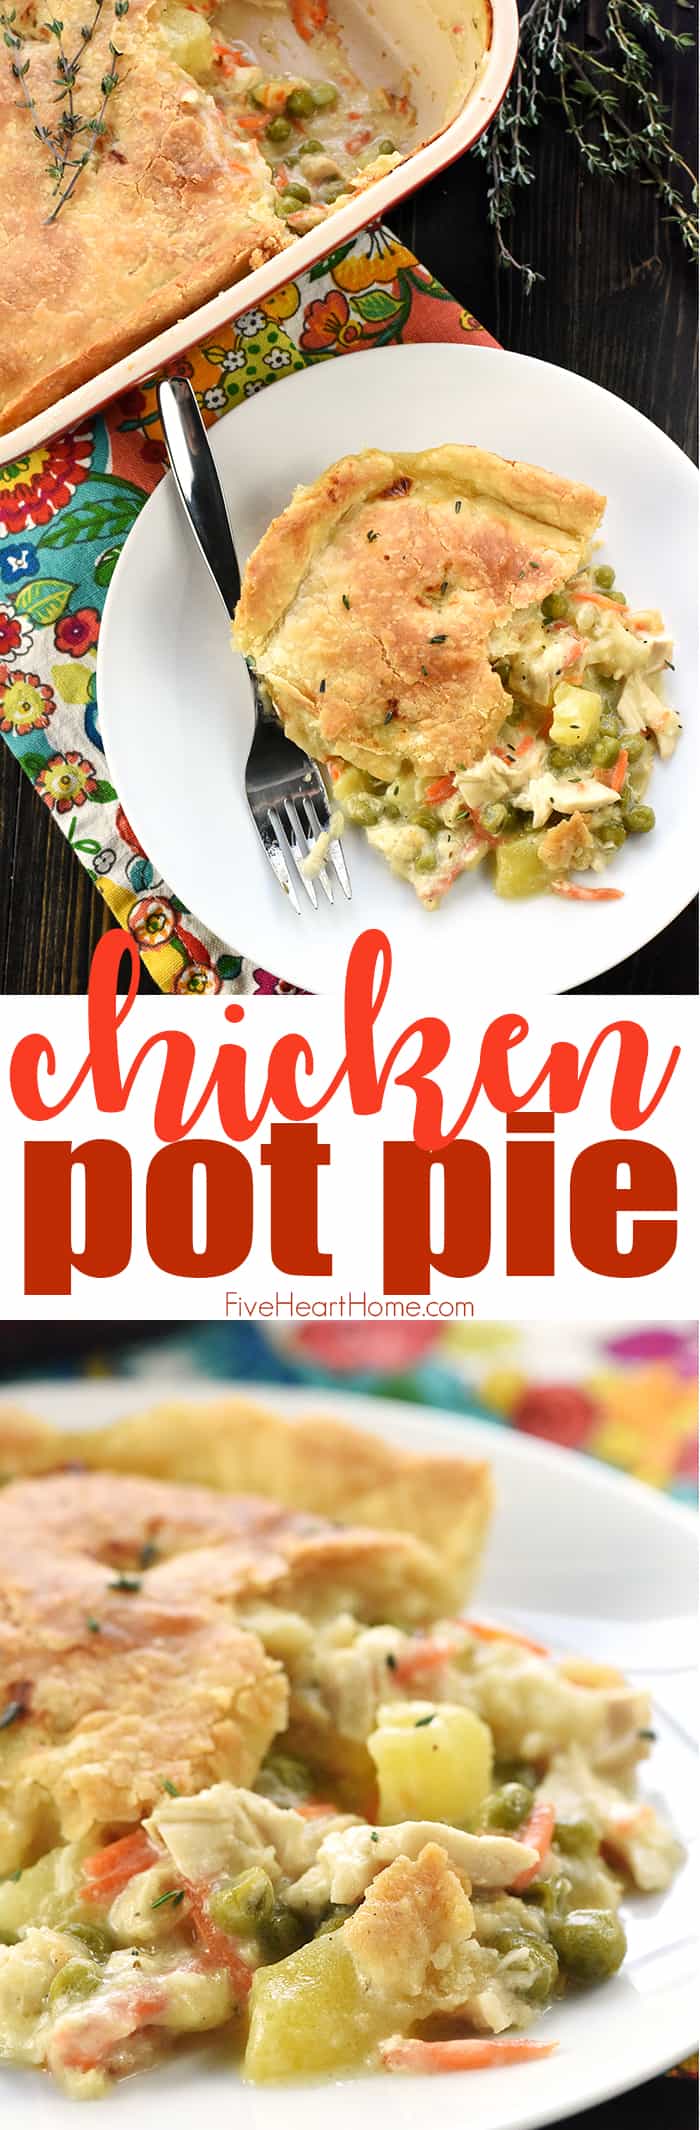 The BEST Chicken Pot Pie ~ features juicy chicken and tender veggies under a flaky, buttery crust for a delicious comfort food classic! | FiveHeartHome.com via @fivehearthome